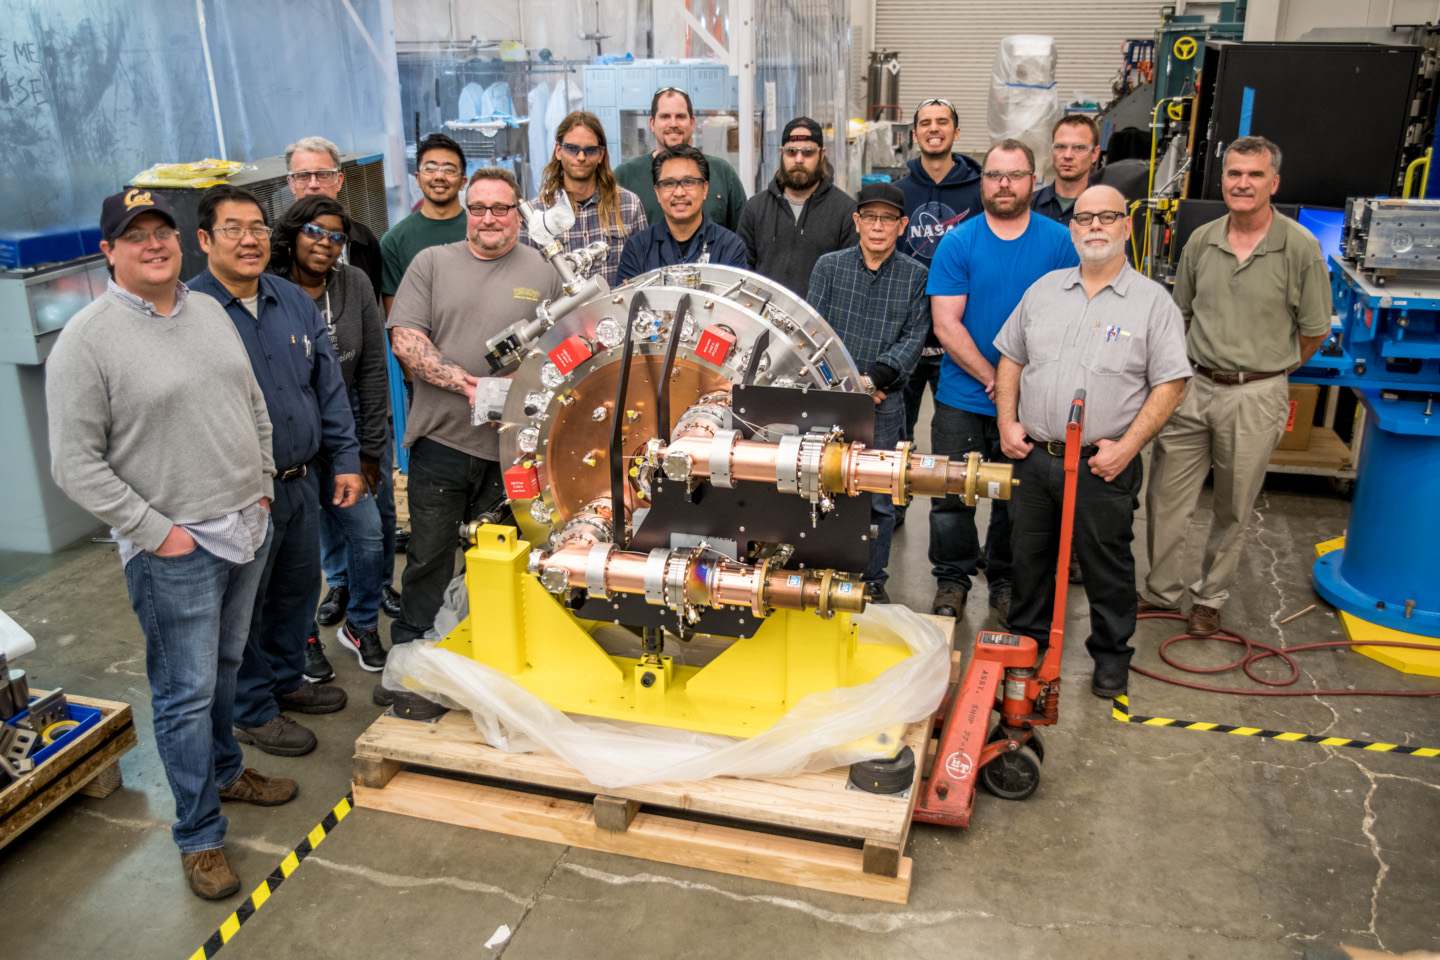 Group photo with the LCLS-II injector that is prepared for shipment to SLAC.